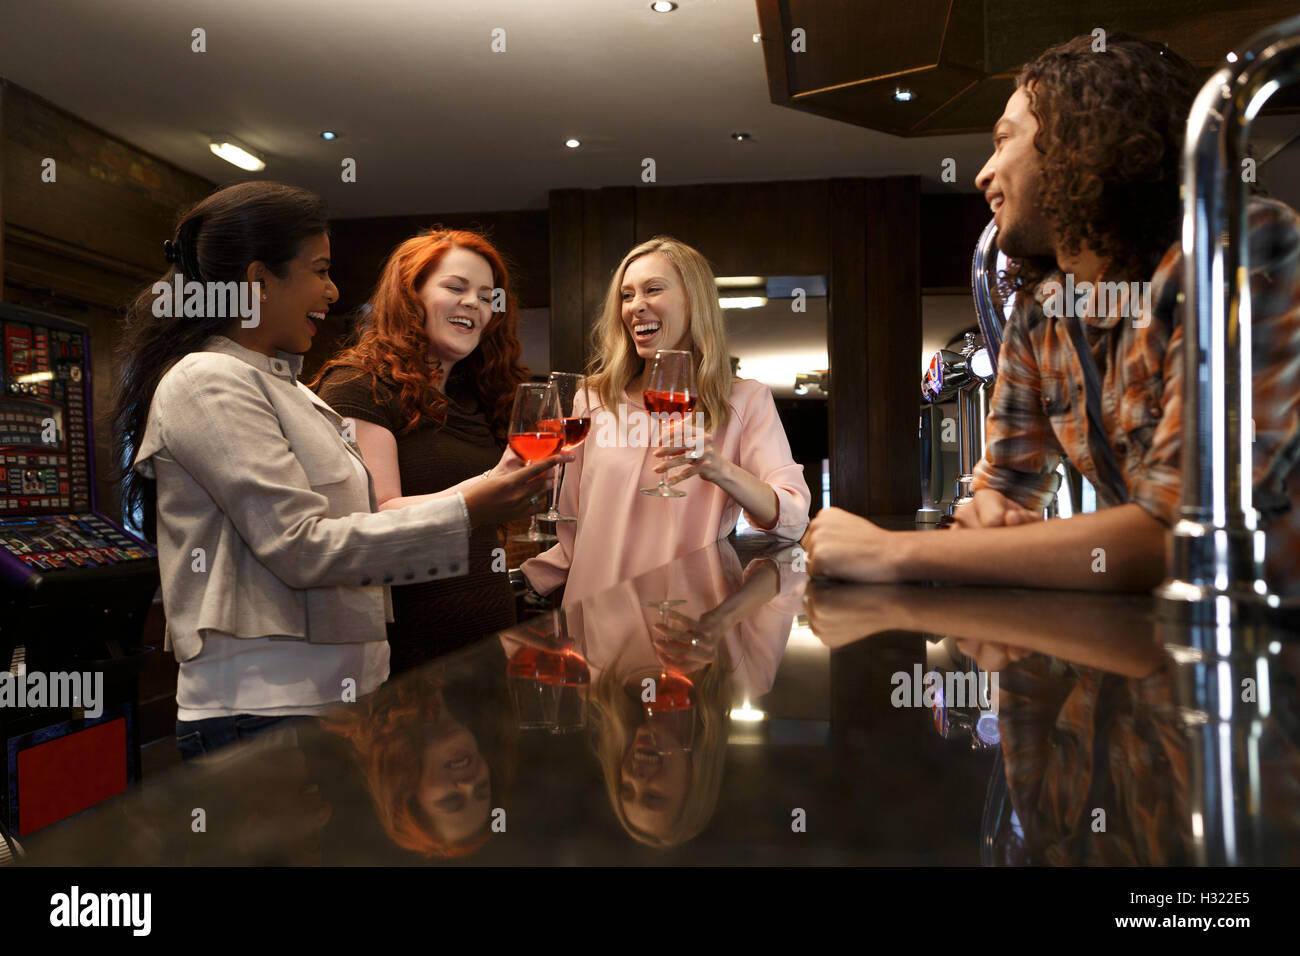 Three women making a toast with glasses of red wine at a bar. Stock Photo